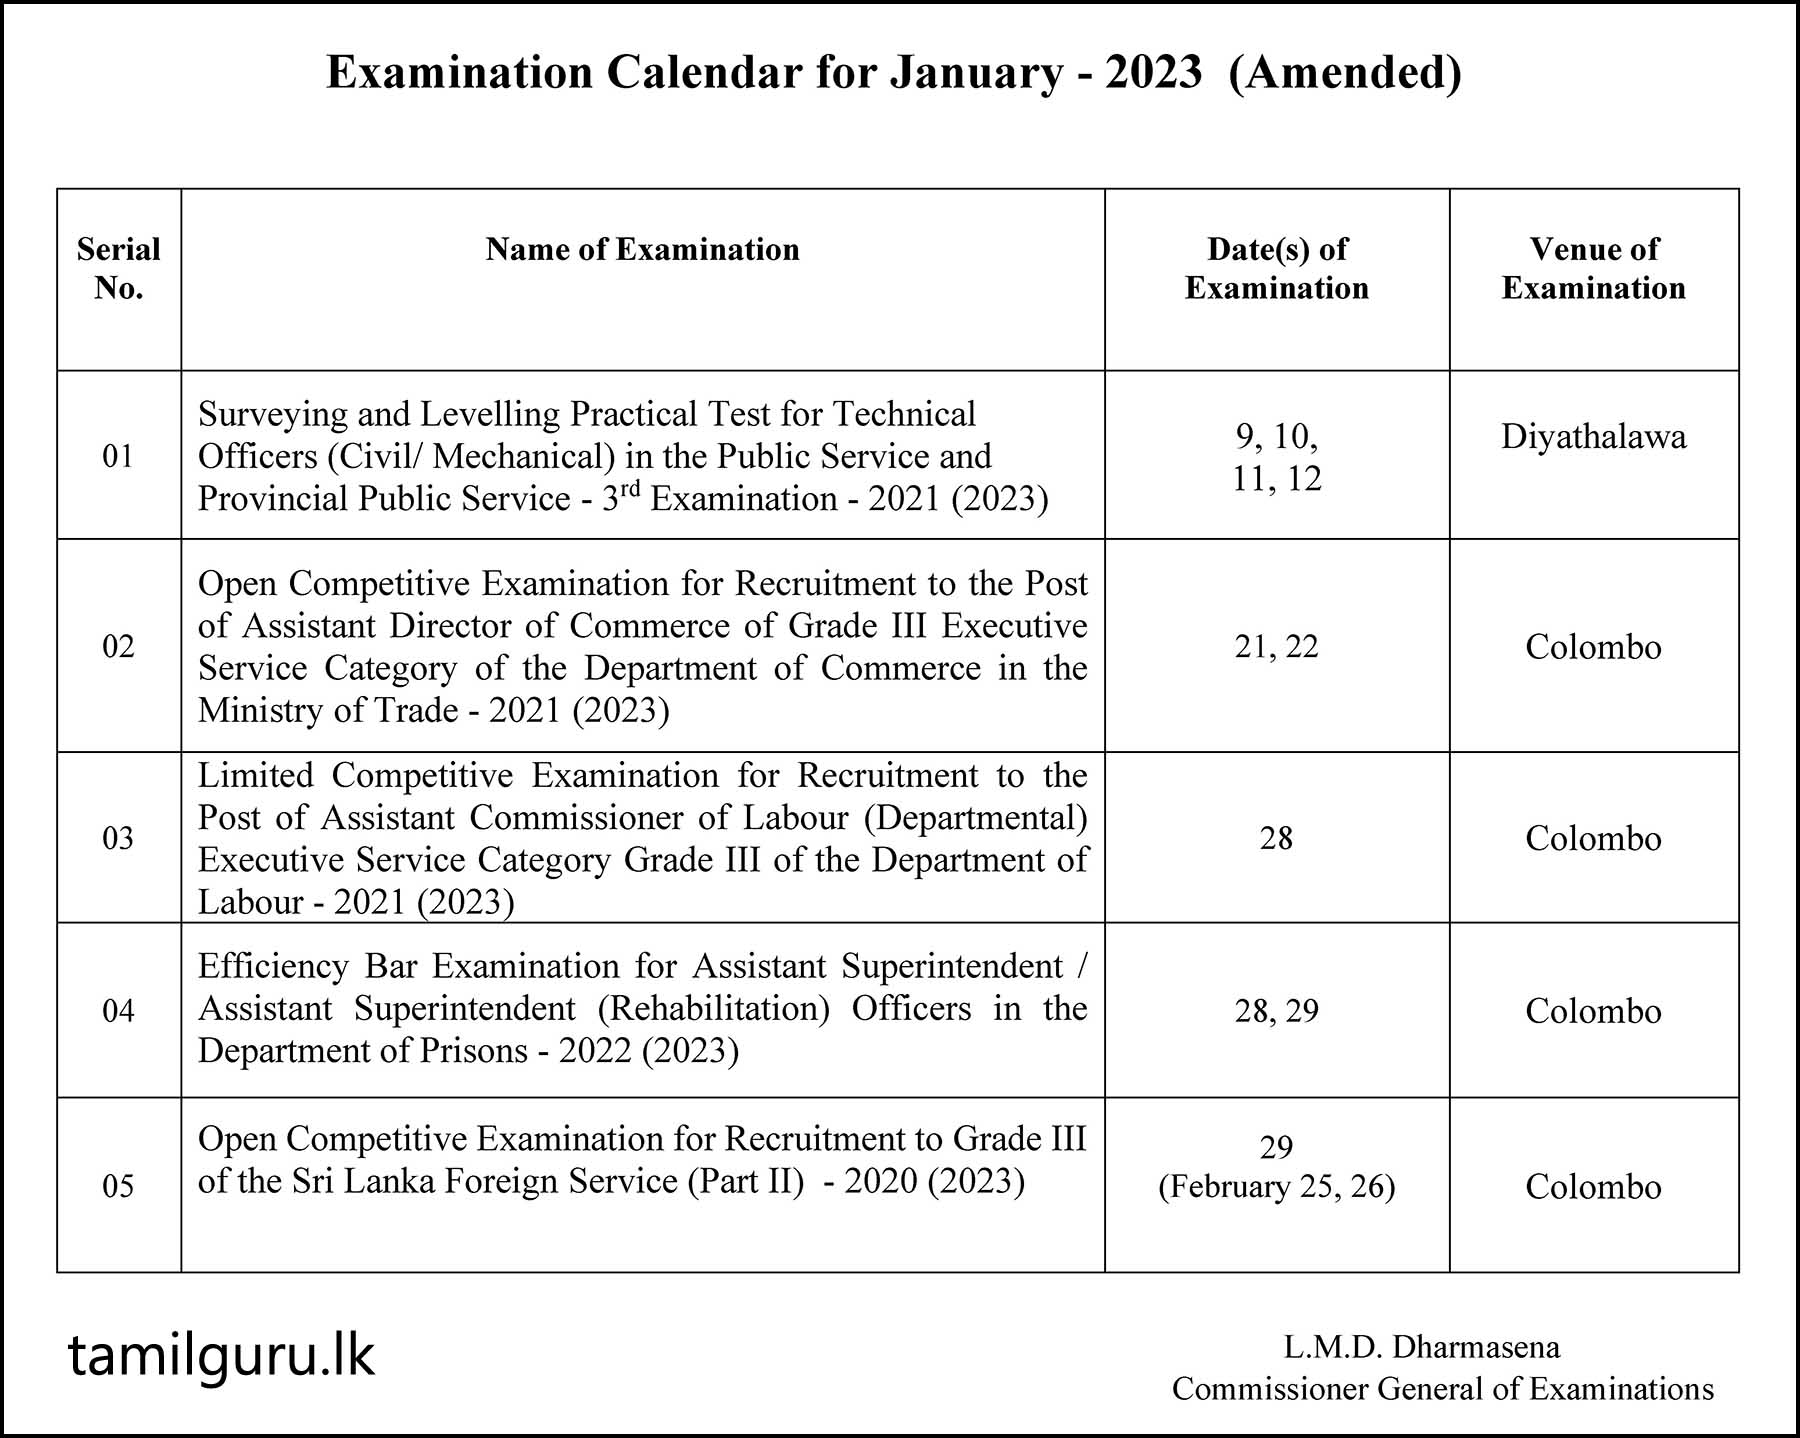 Examination Calendar for January 2023 - Department of Examinations (In English)